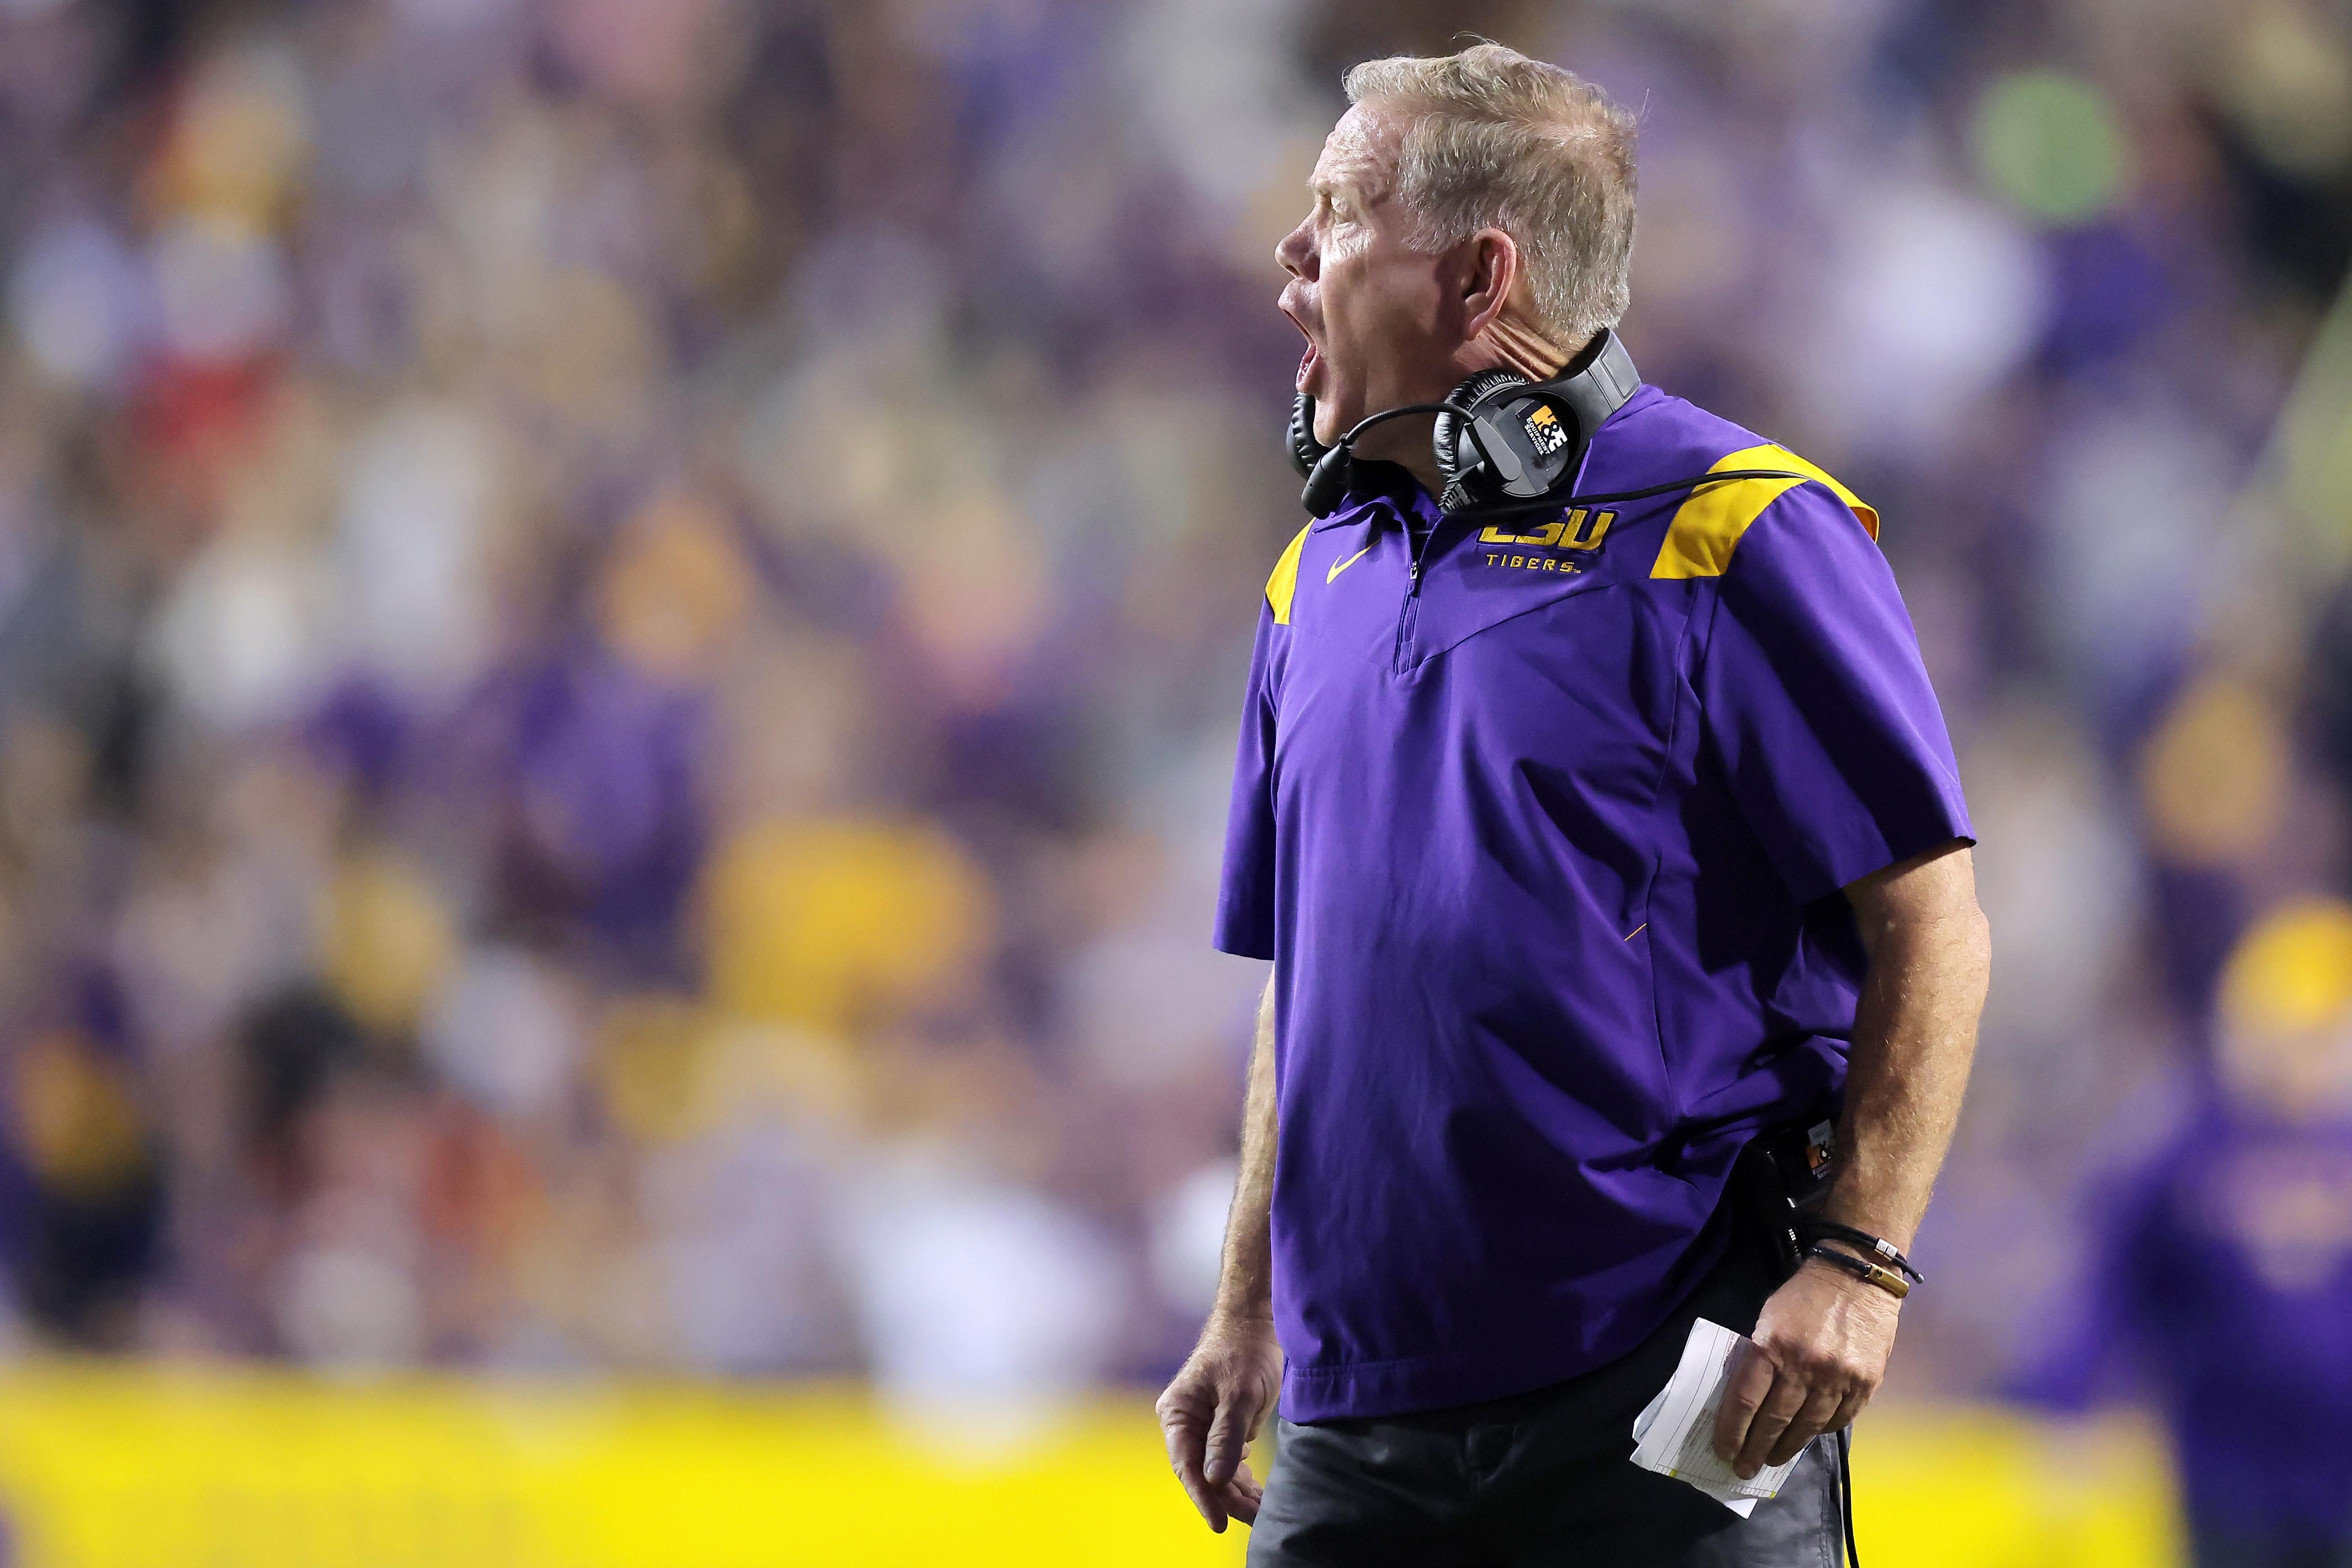 LSU football coach Brian Kelly stands on the sidelines and shouts.